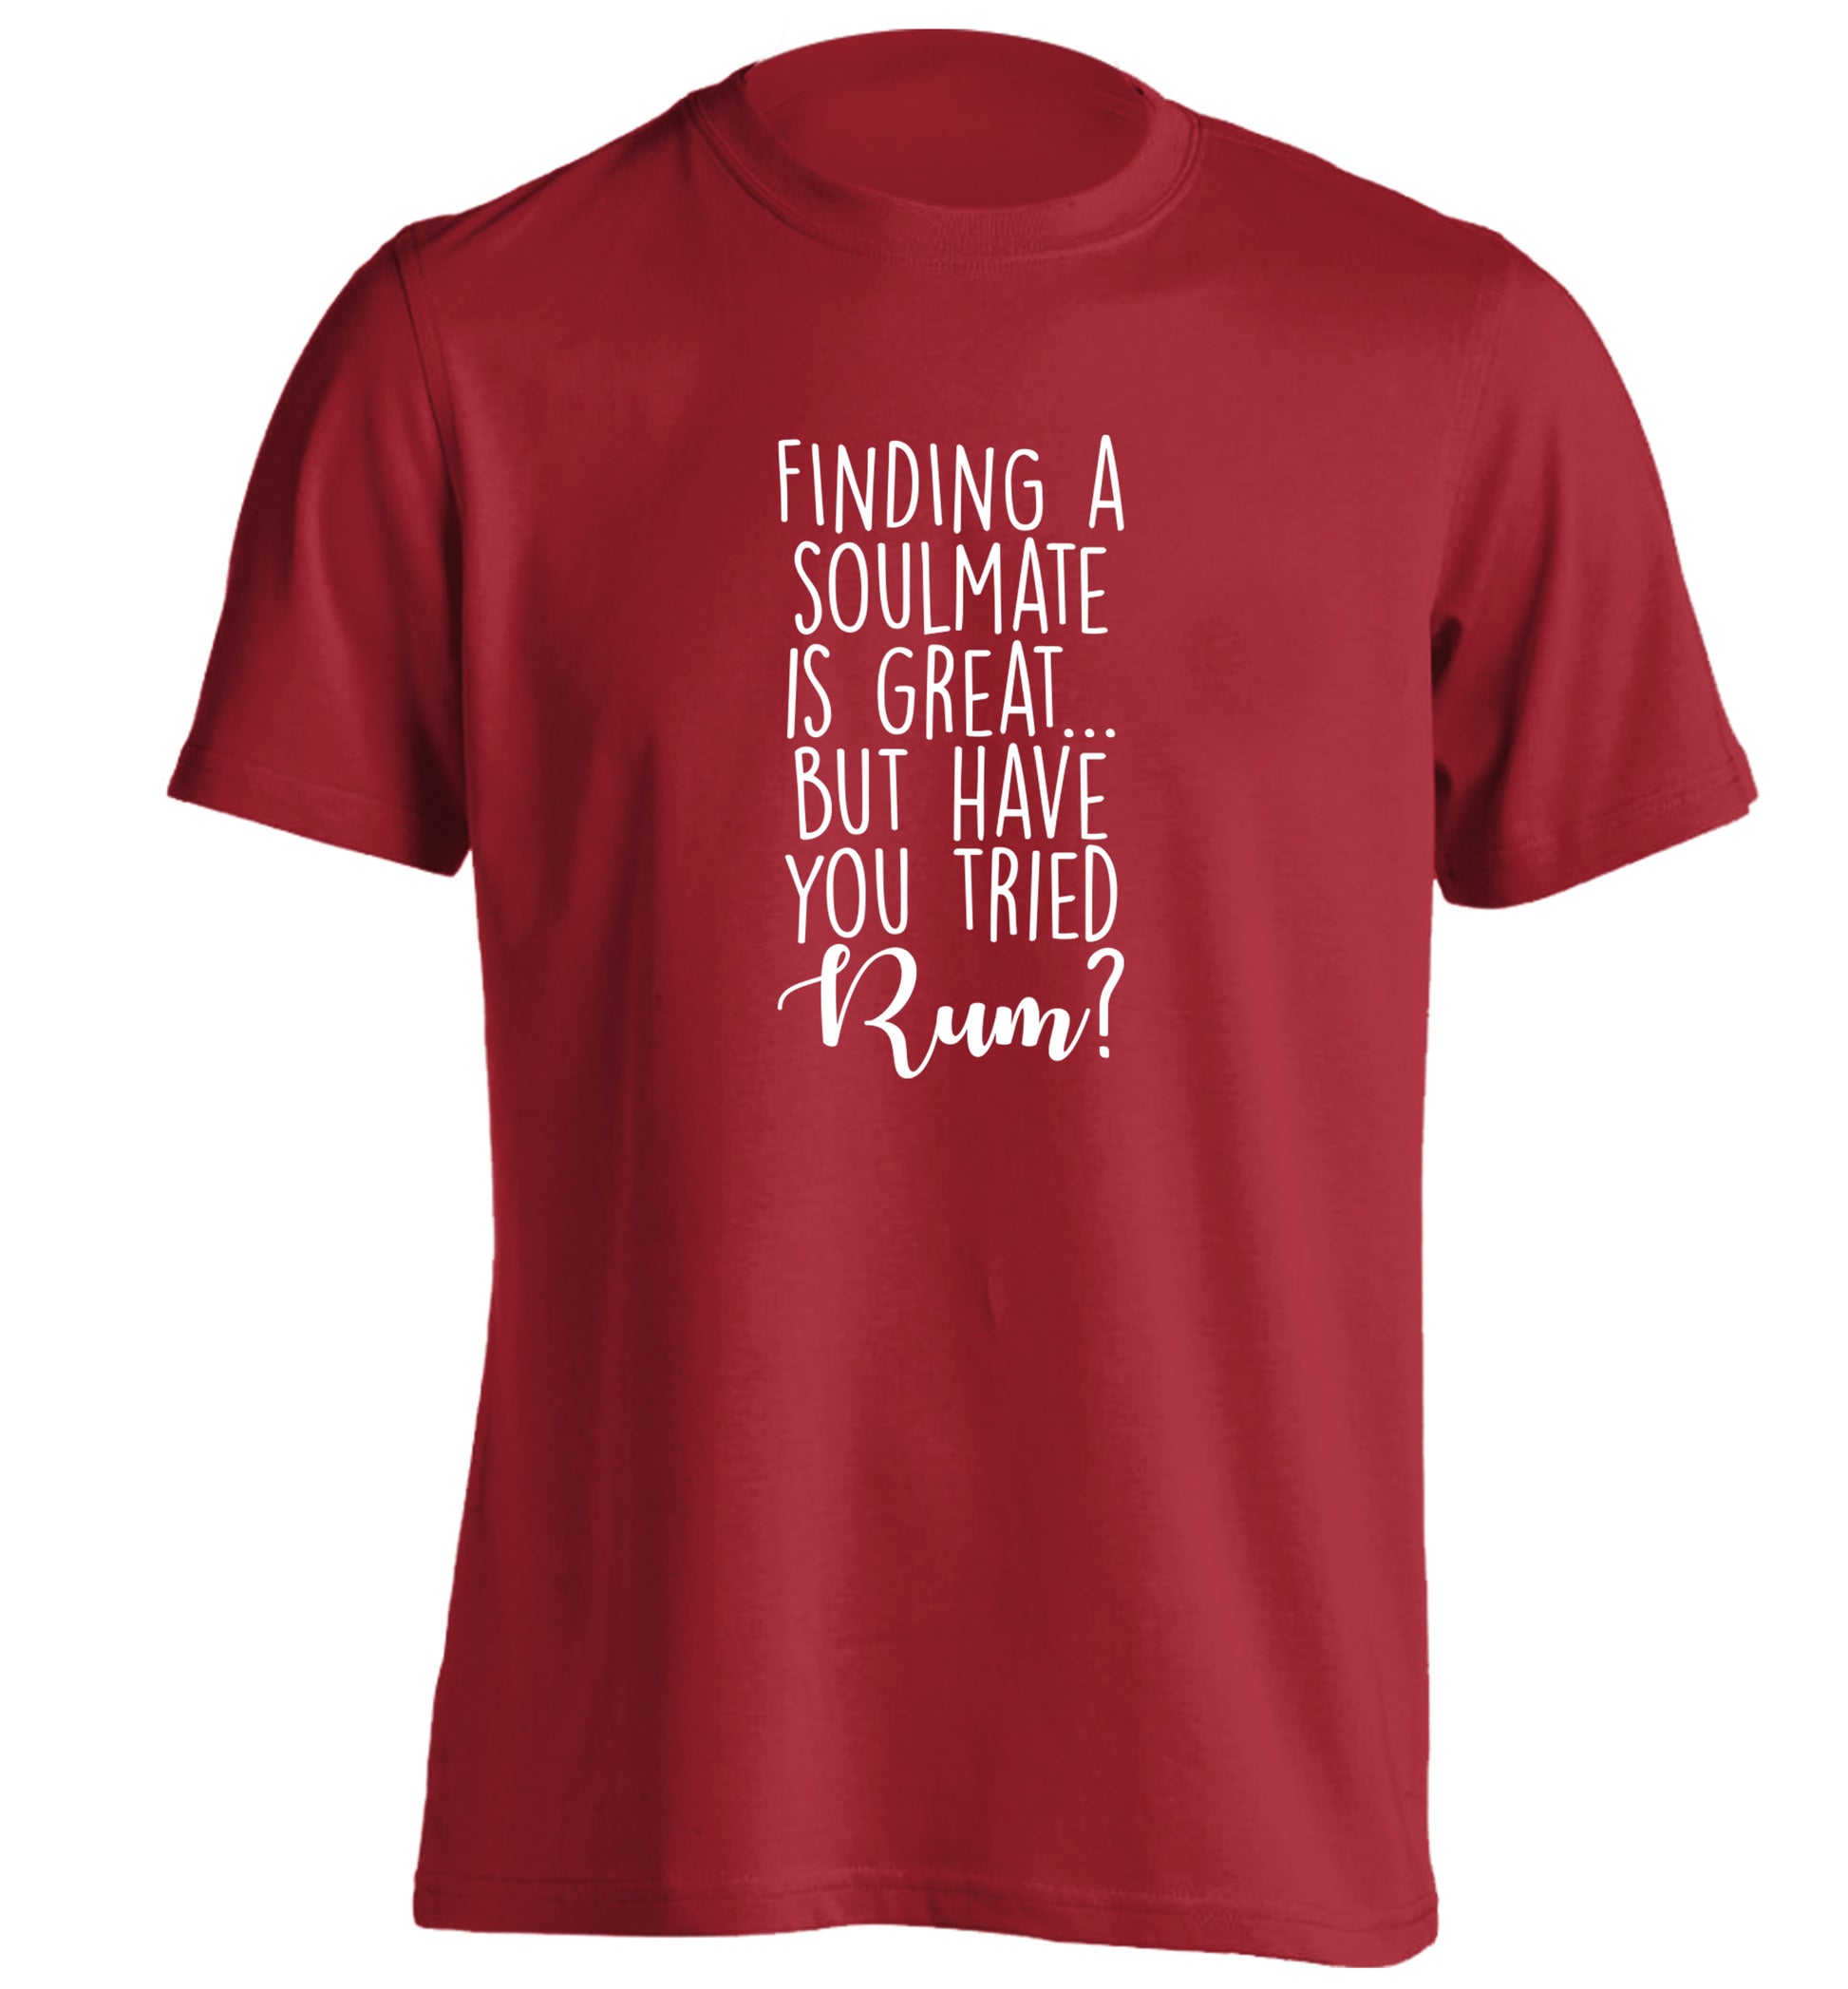 Finding a soulmate is great but have you tried rum? adults unisex red Tshirt 2XL